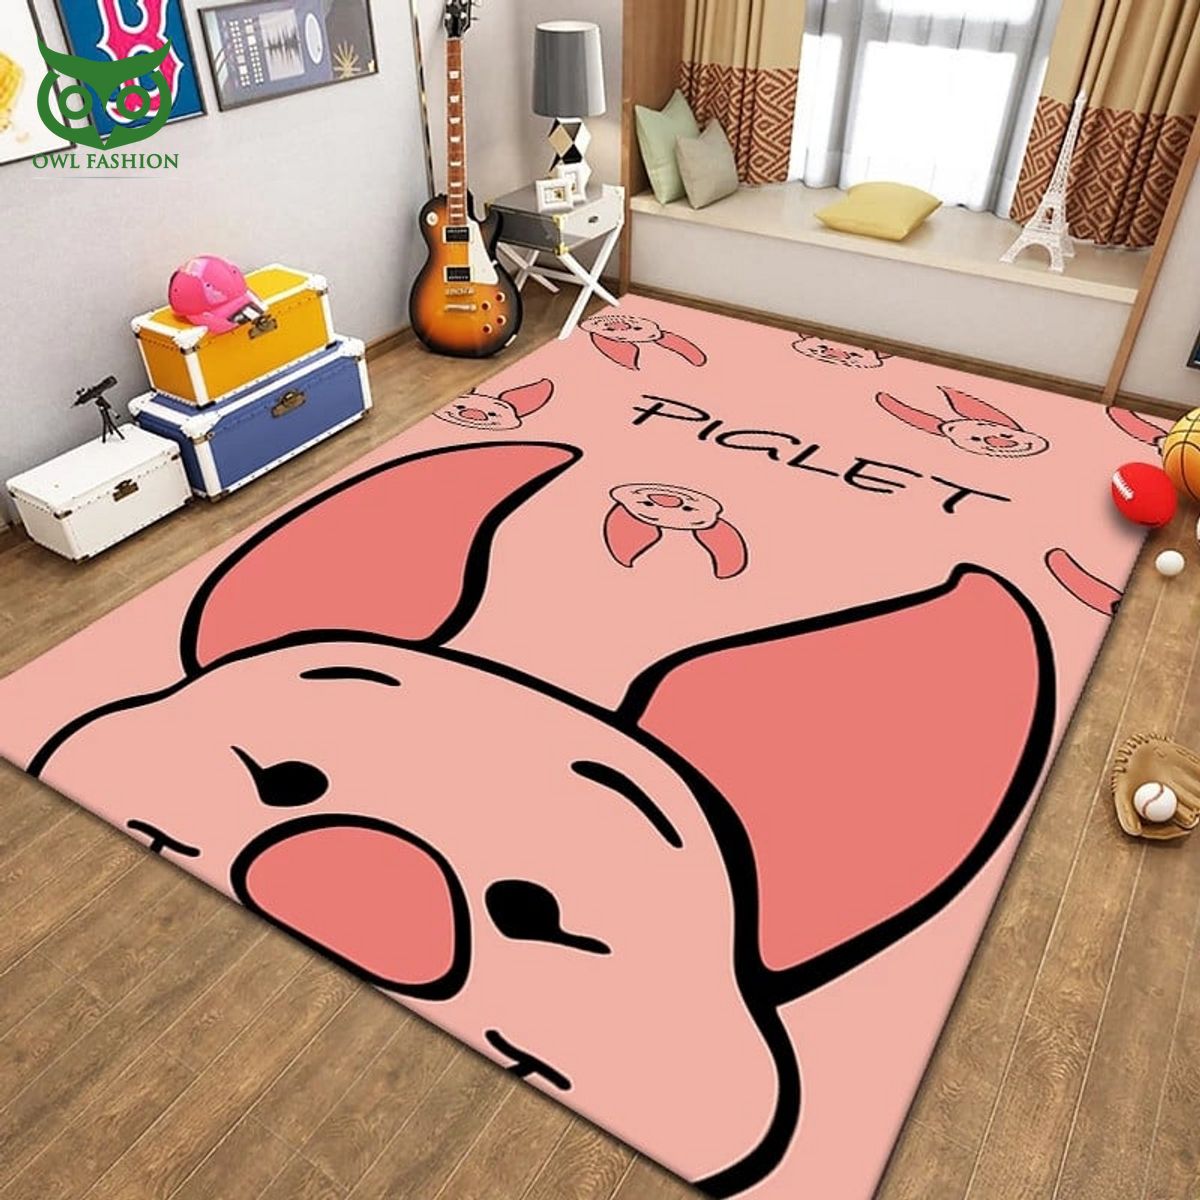 Piglet Winnie The Pooh Limited Carpet Nice photo dude